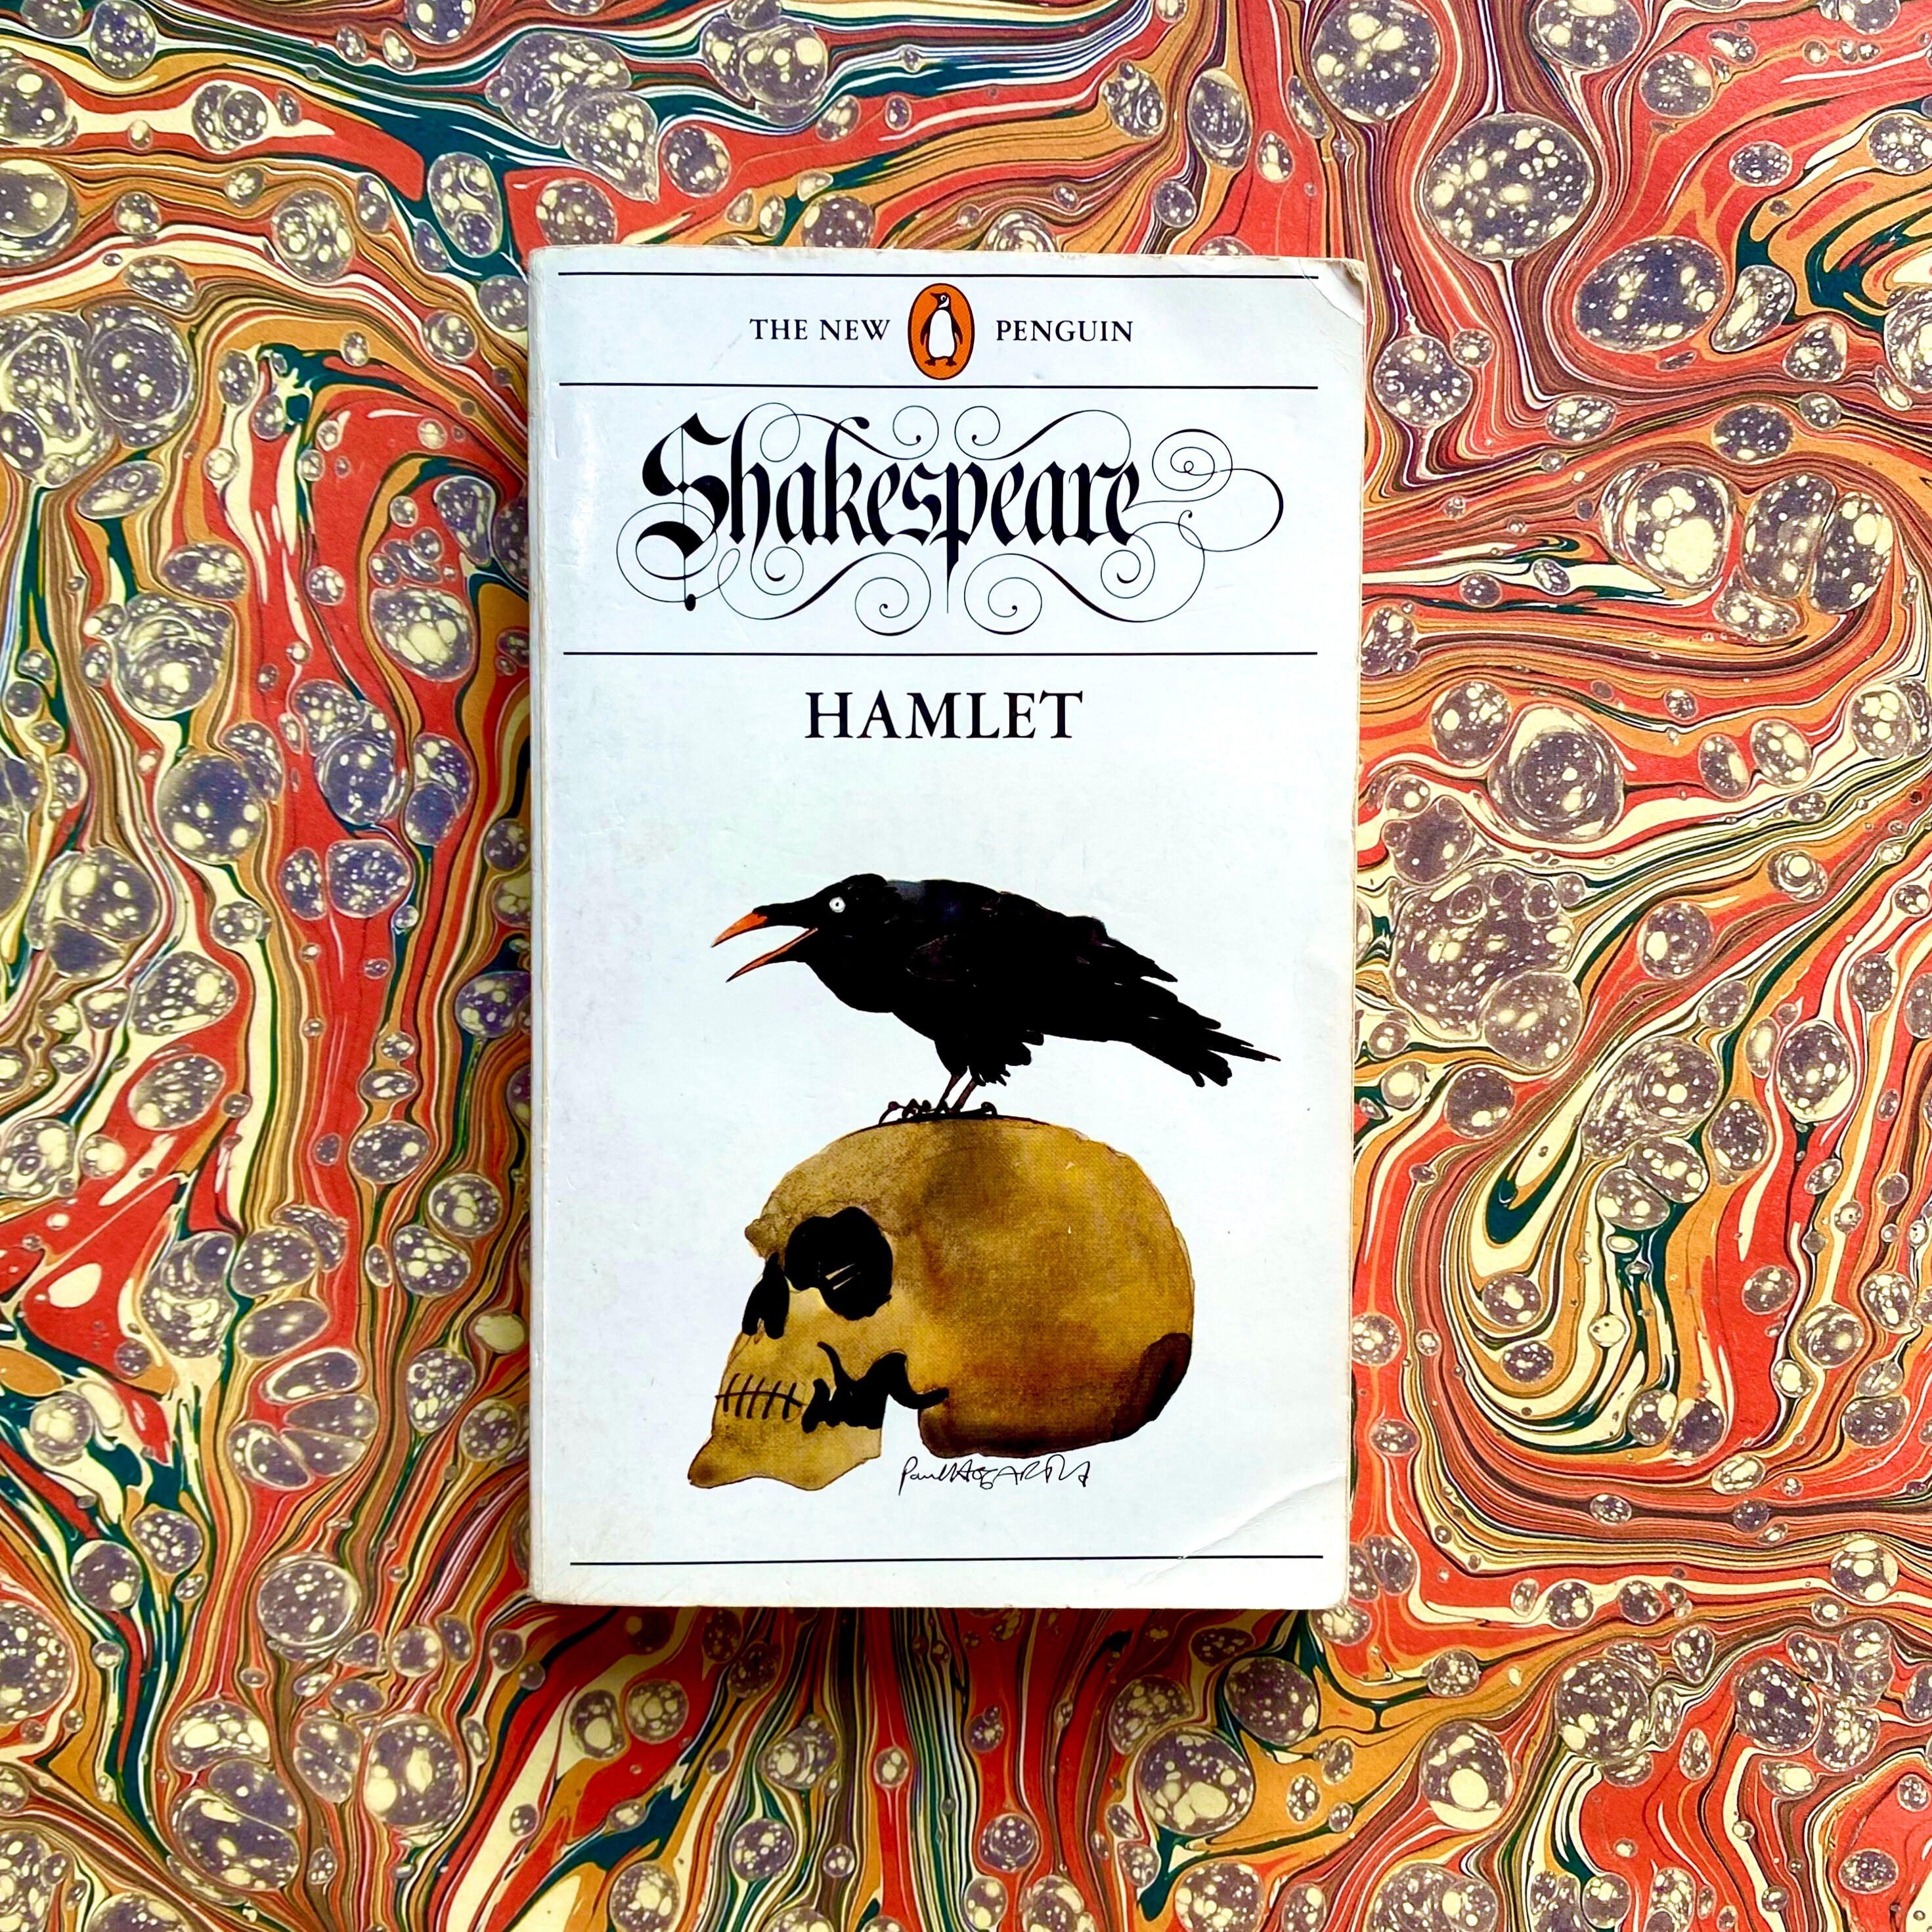 Hamlet Shakespeare. Vintage Play/drama Paperback. 1985. Published by Penguin  Books. 